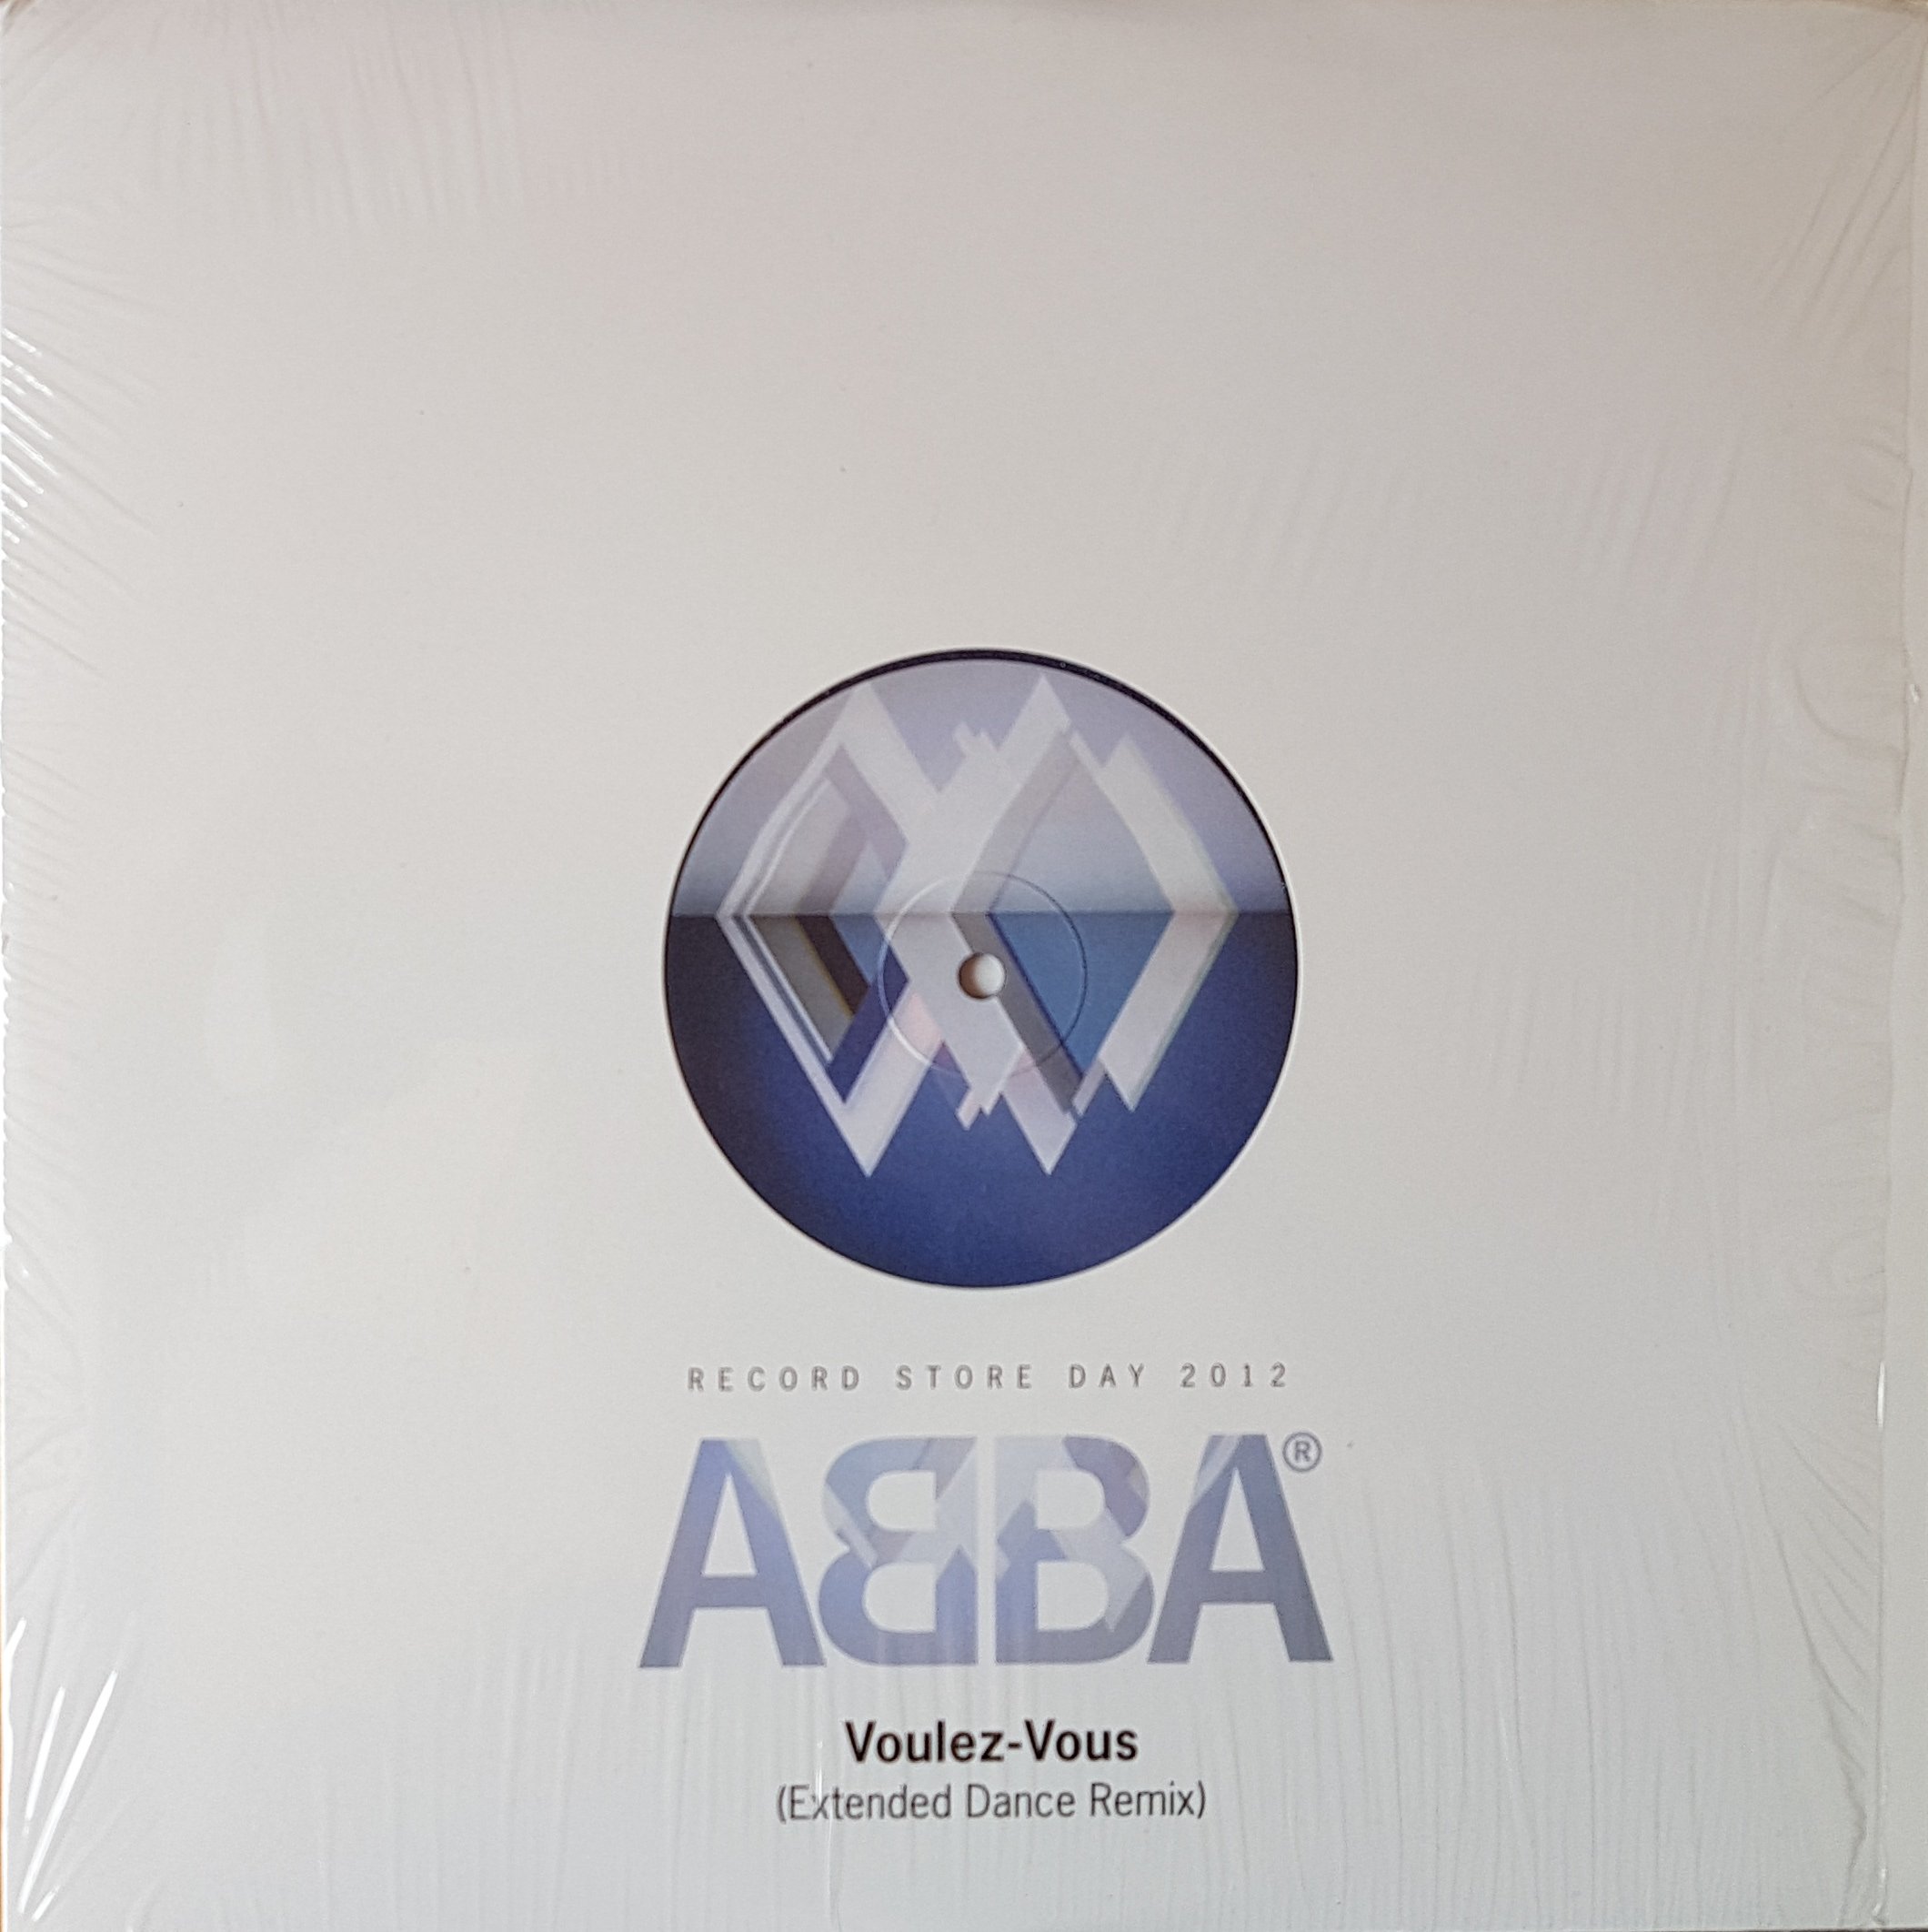 Picture of 00602527957302 Voulez-vous (Extended dance remix) - Limited coloured vinyl - Record Store Day 2012 by artist B. Andersson / B. Ulvaeus / ABBA